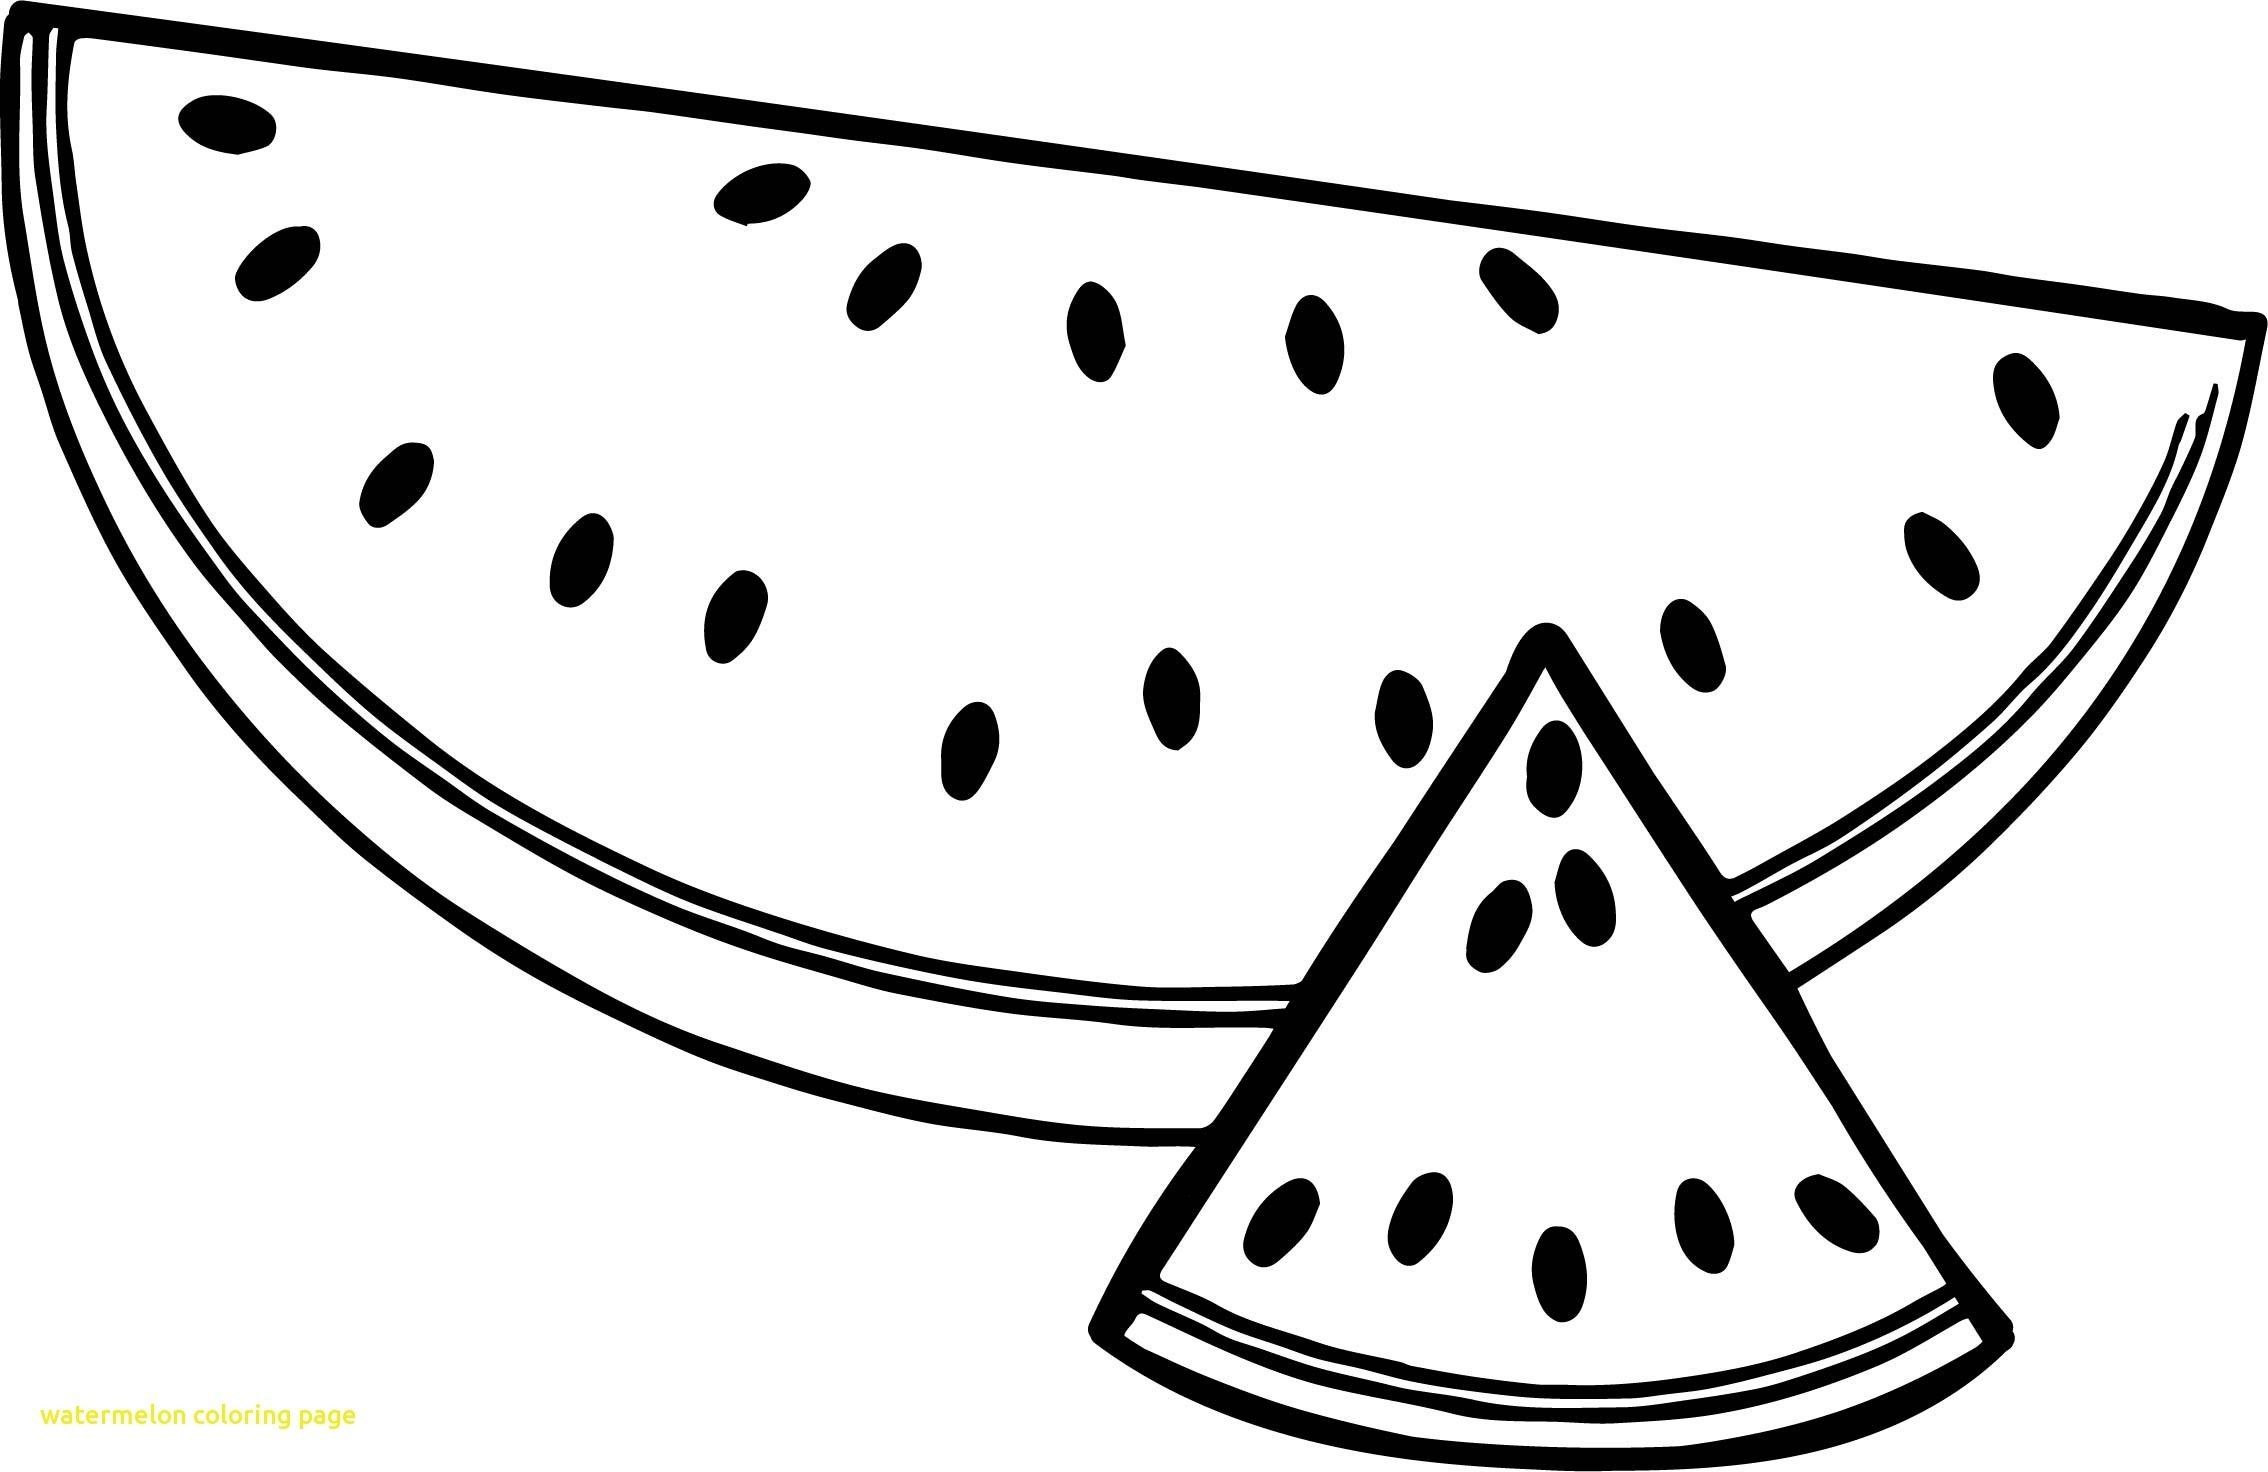 Coloring Pages : Watermelon Coloring Page Watermelon Coloring Page